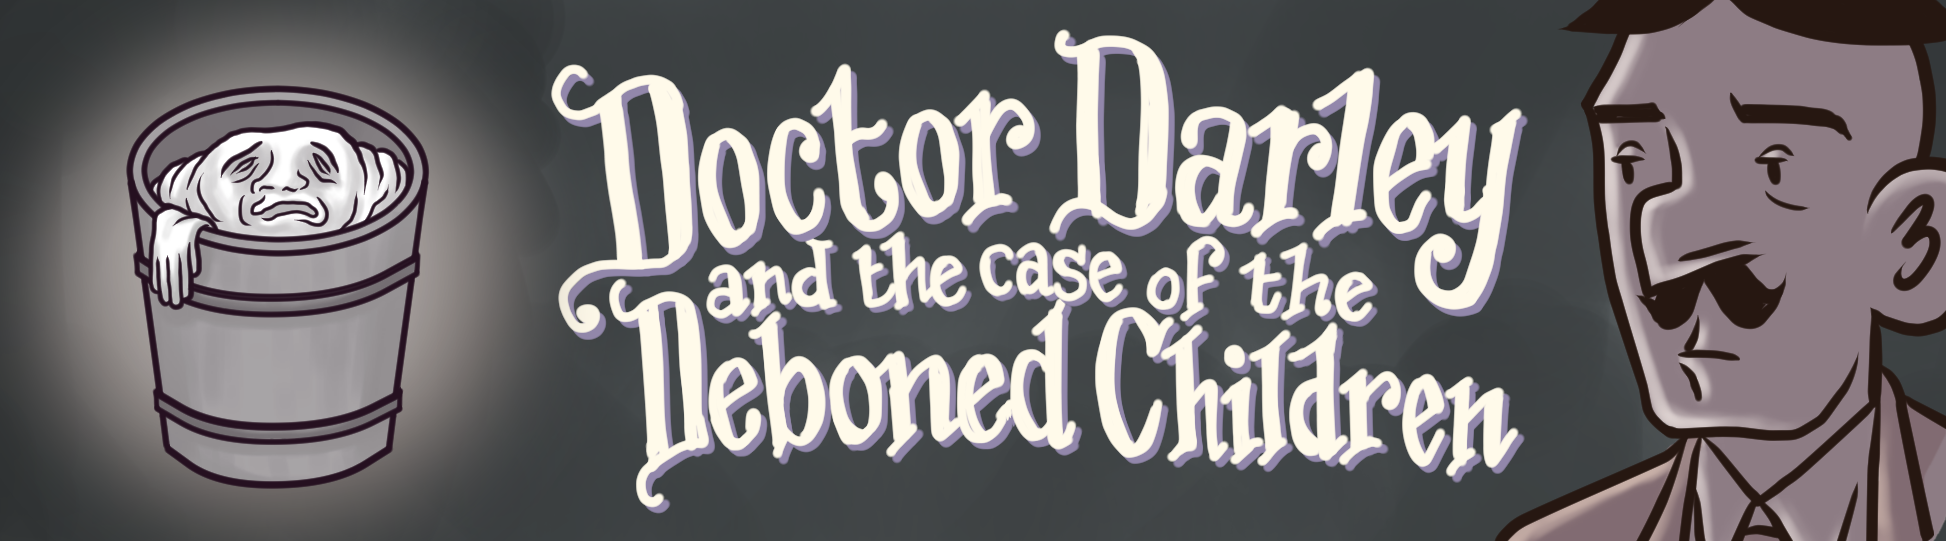 Dr. Darley and the Case of the De-boned Children